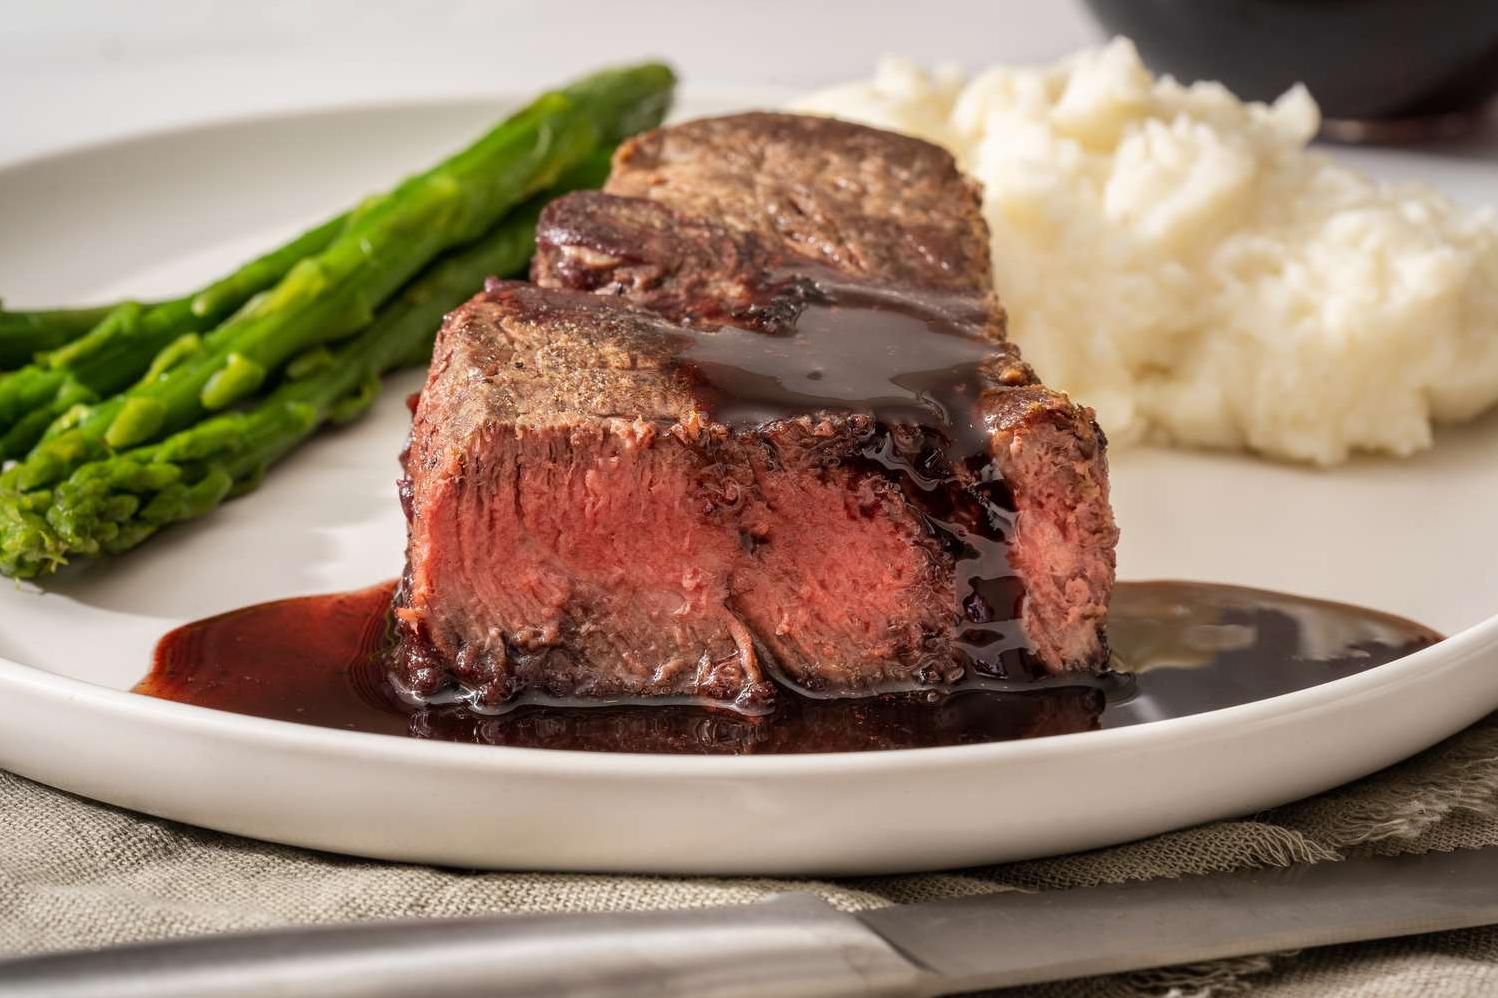 Delicious Beef Filet Recipe Perfect for Any Occasion